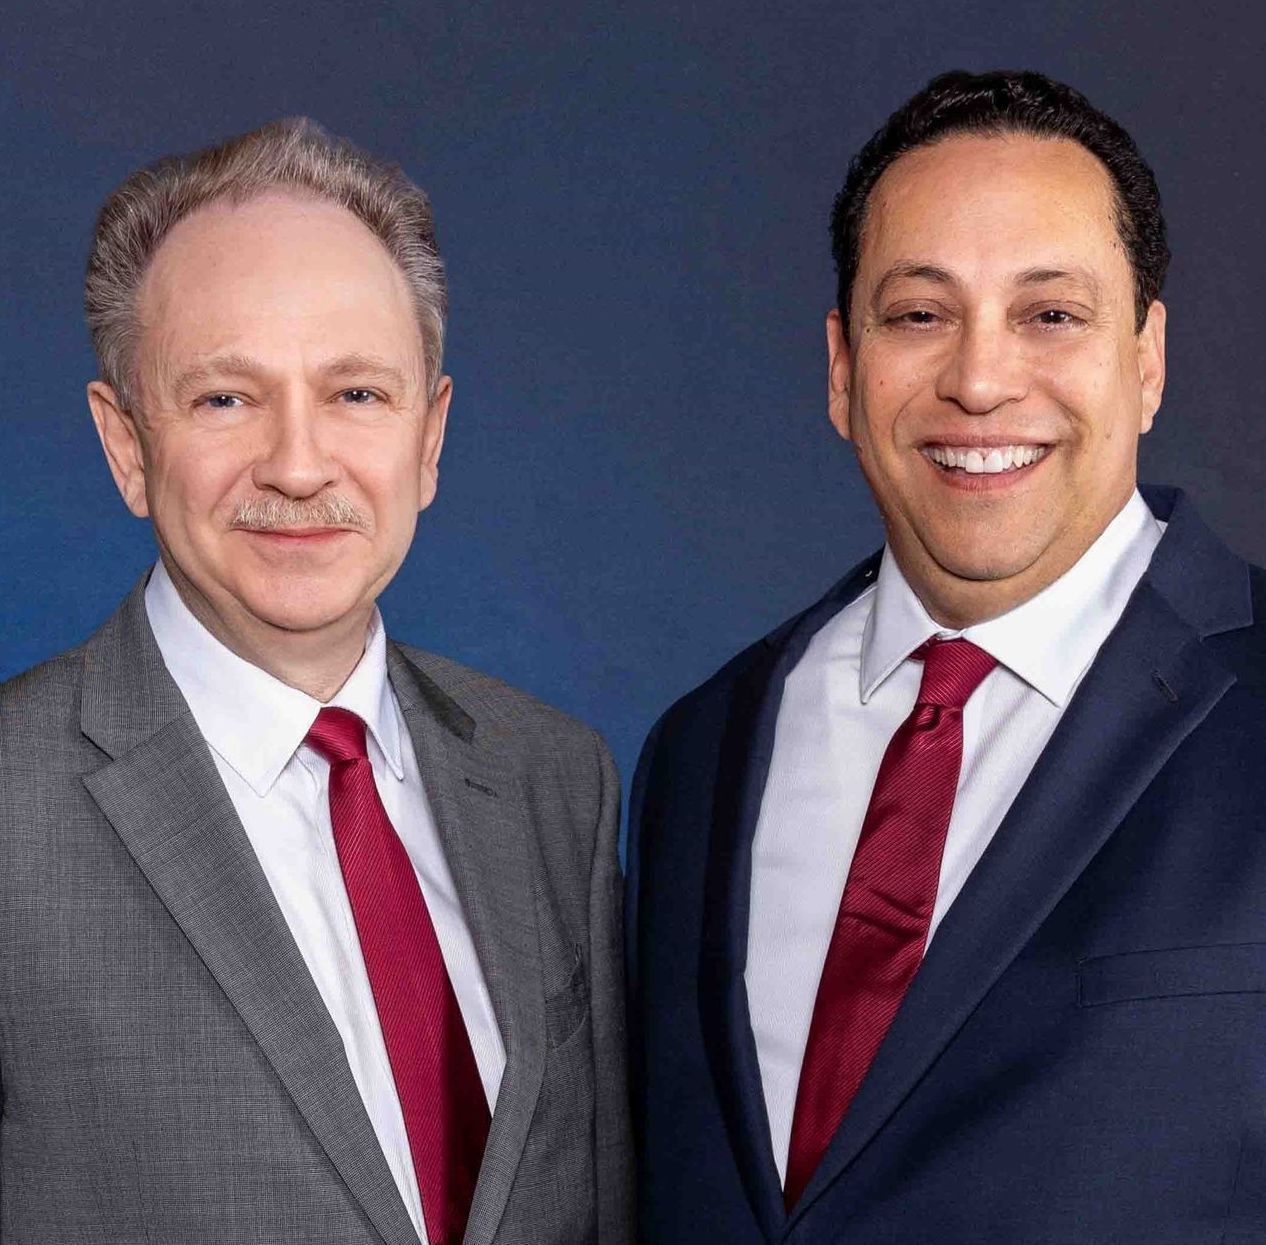 Two men in suits and ties are posing for a picture